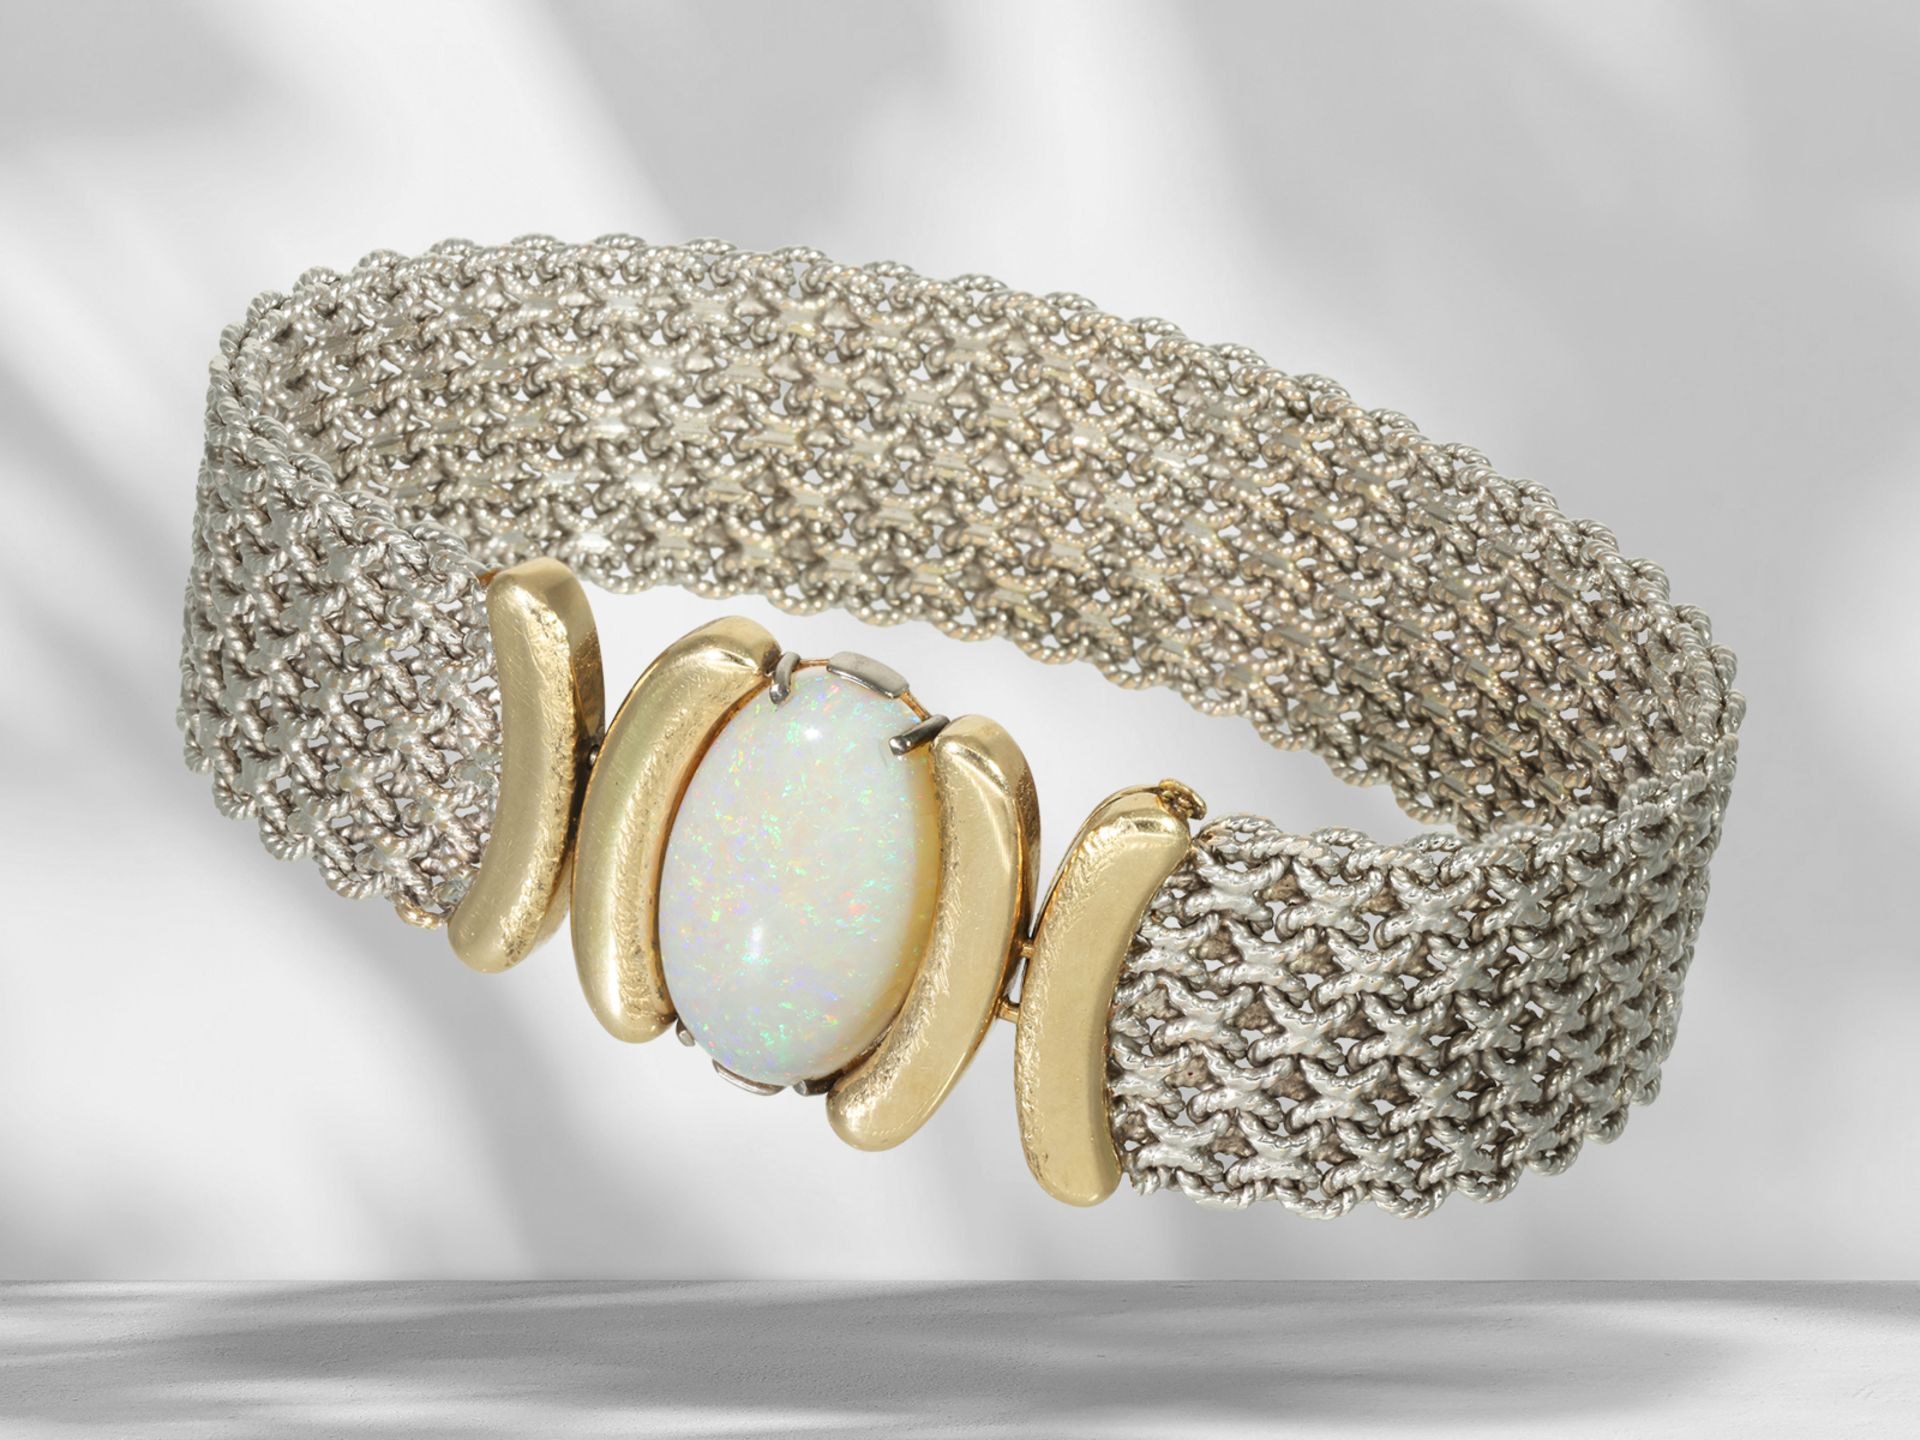 Attractive, heavy and handcrafted bicolour designer bracelet with opal setting